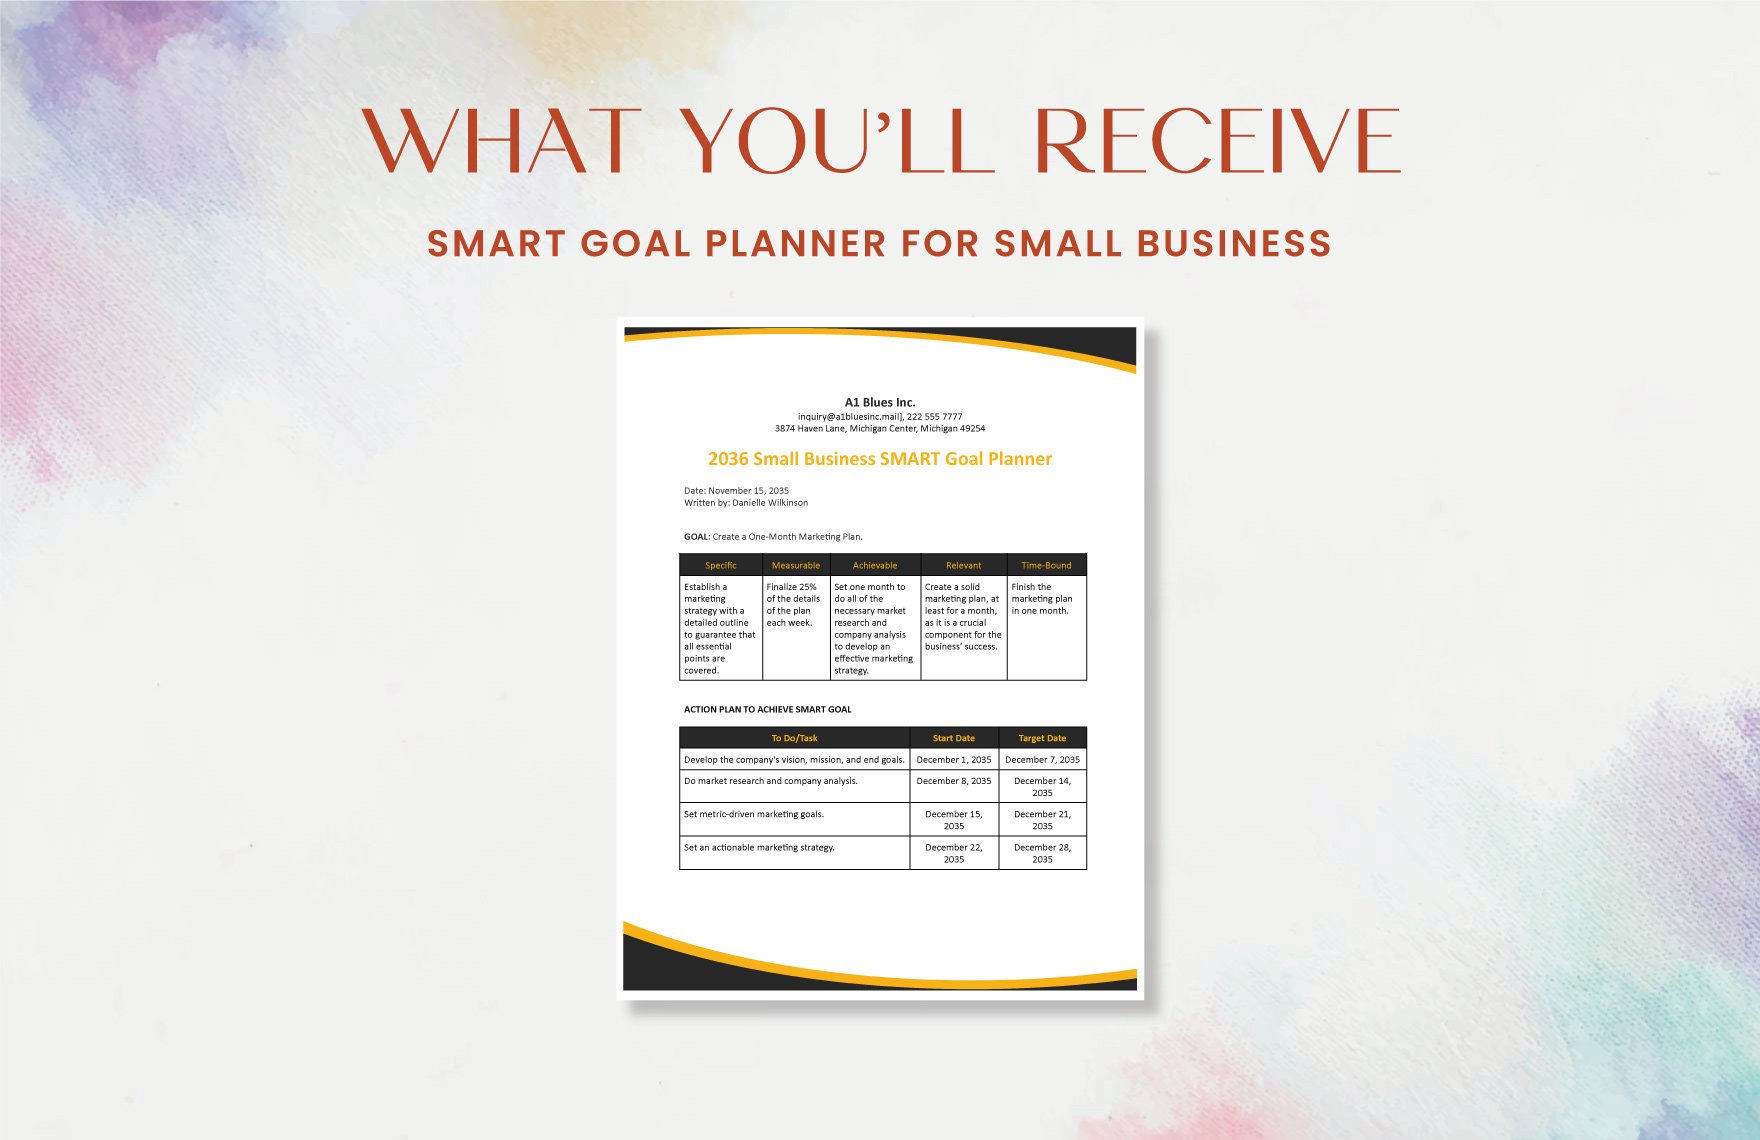 SMART Goal Planner for Small Business Template